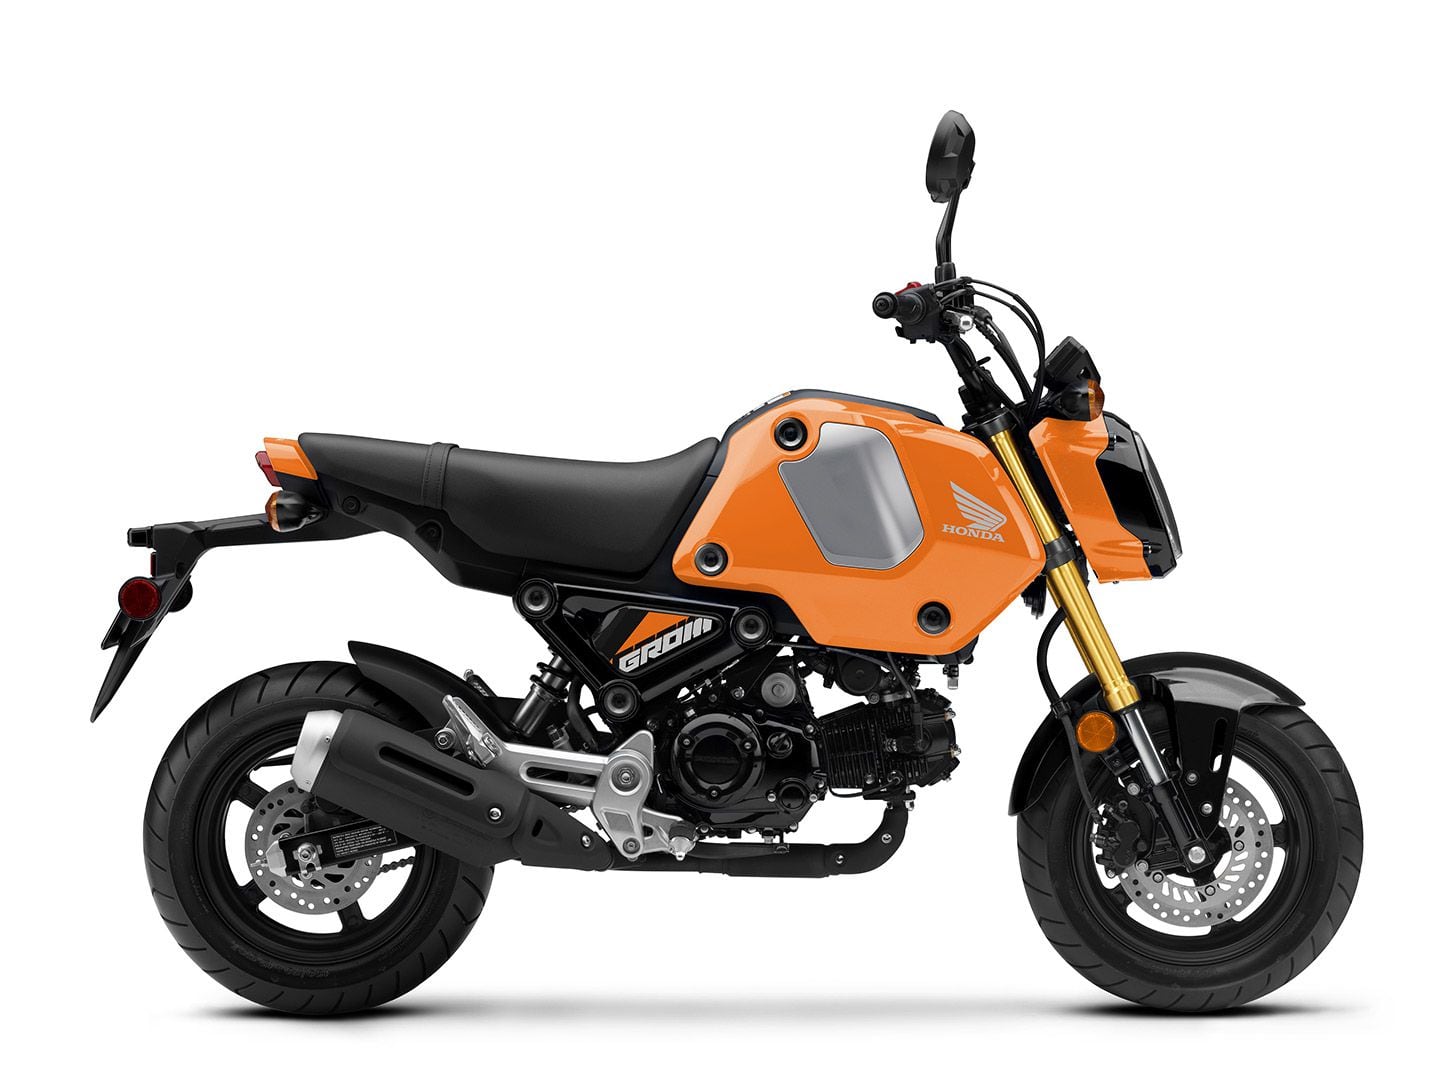 The Grom’s engine is peppy, yet it’s a fantastic fuel sipper with a claimed 166.5 mpg.